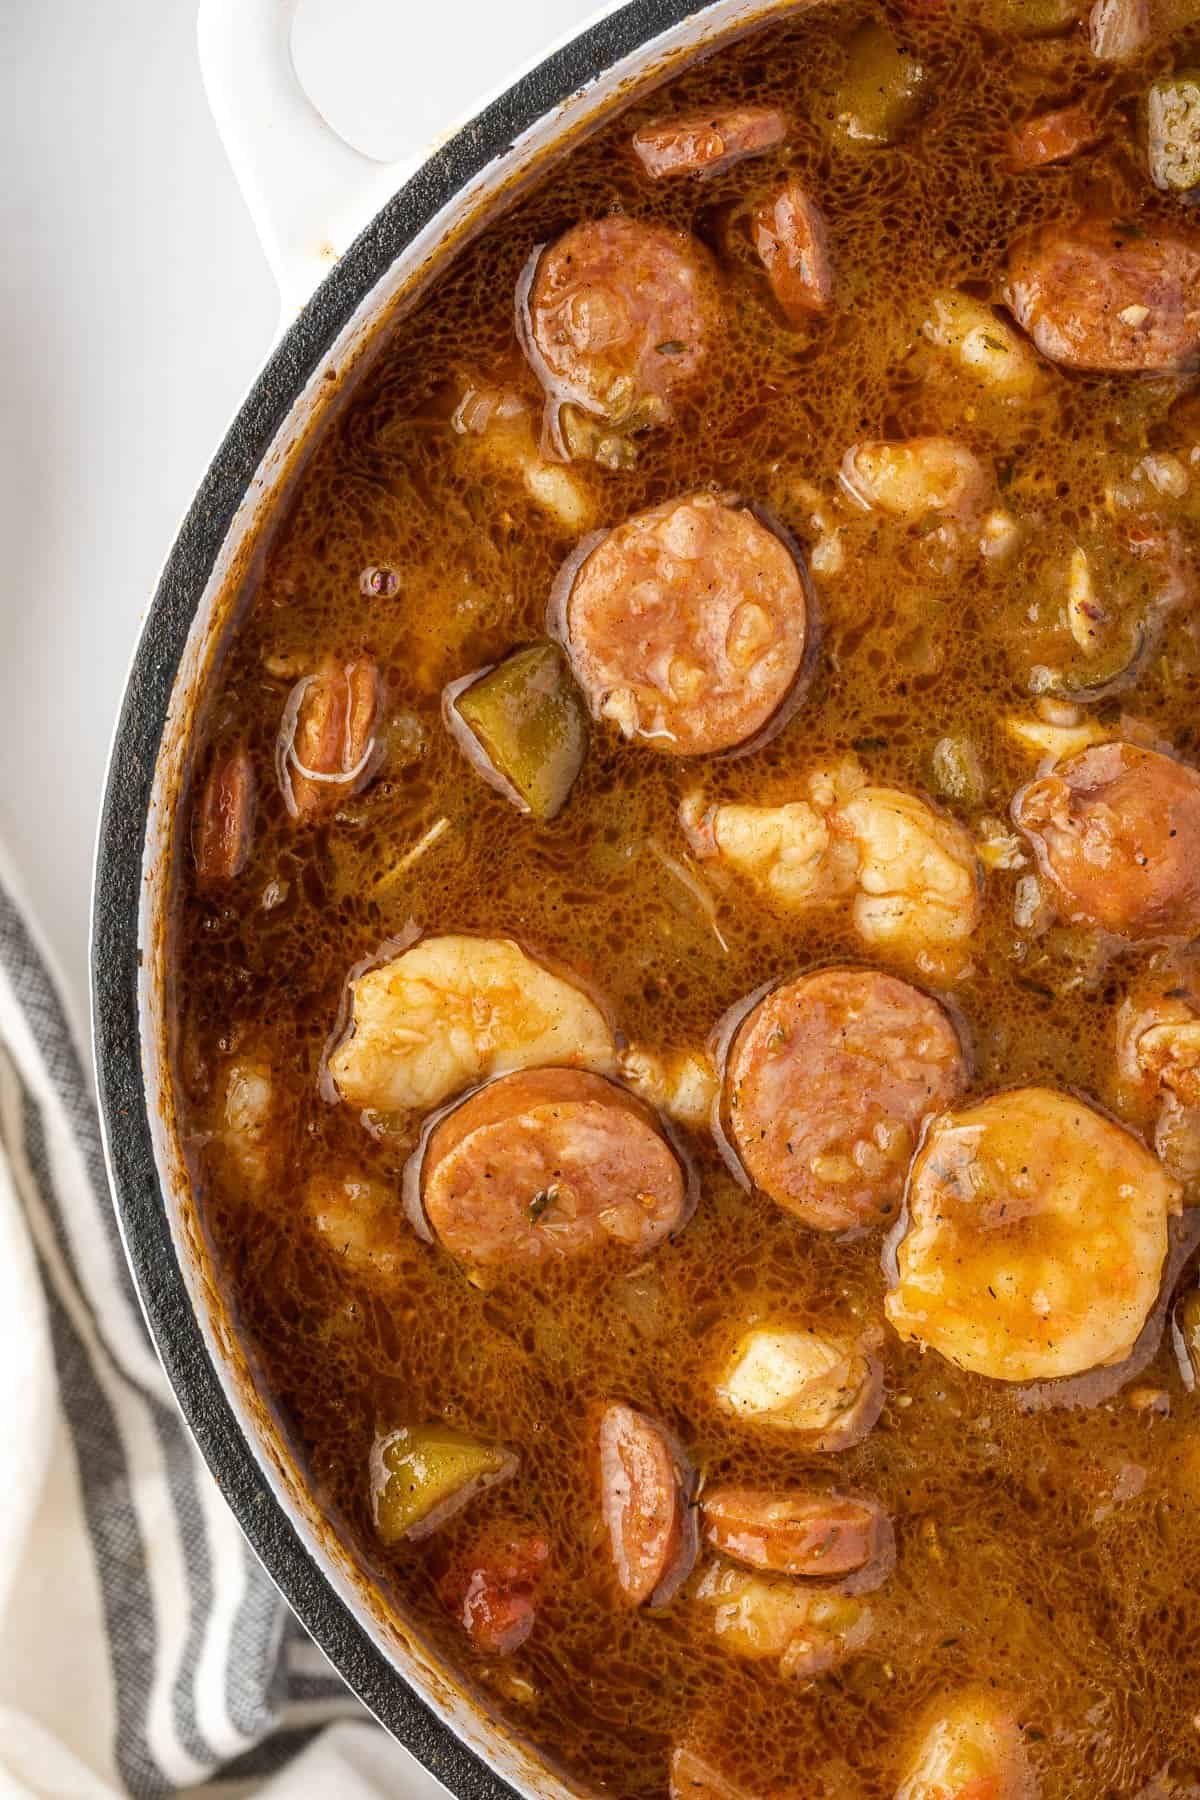 Seafood Gumbo Recipe: How to Make It